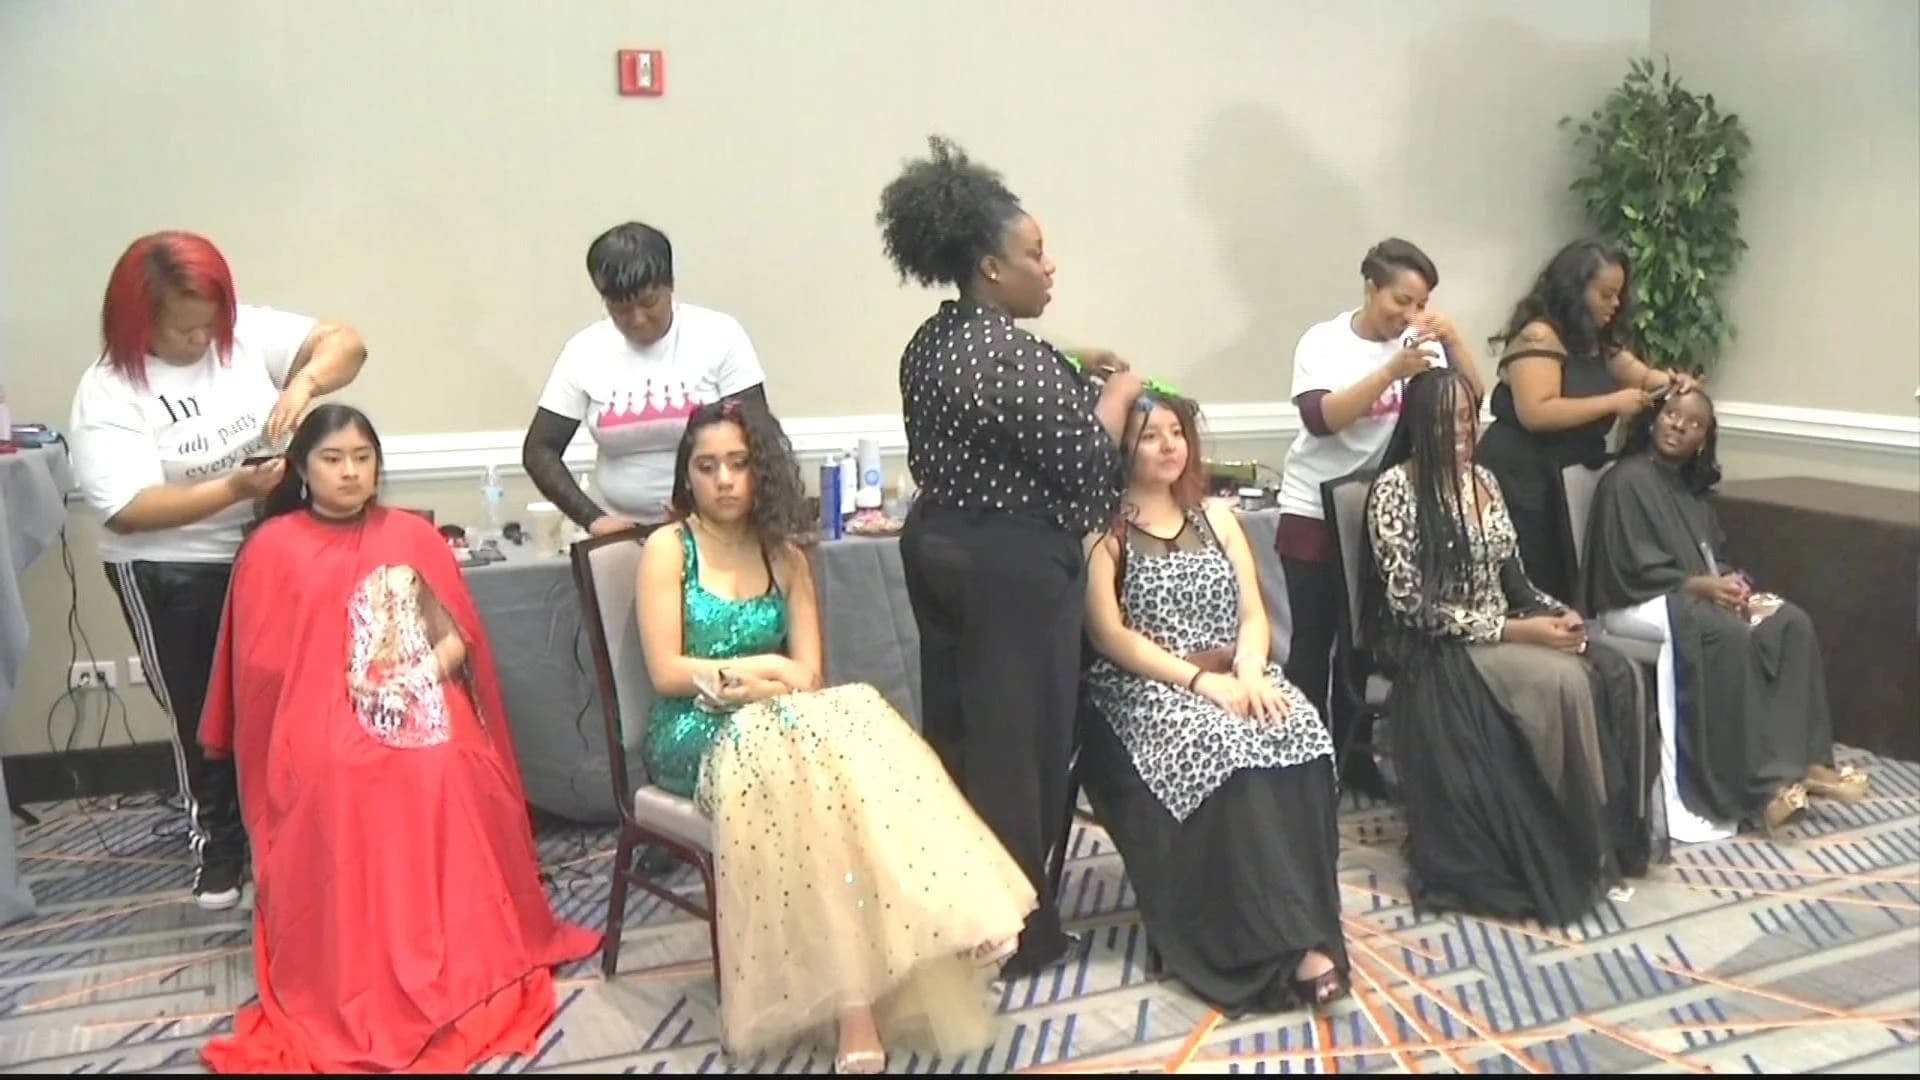 Group provides teens free prom outfits